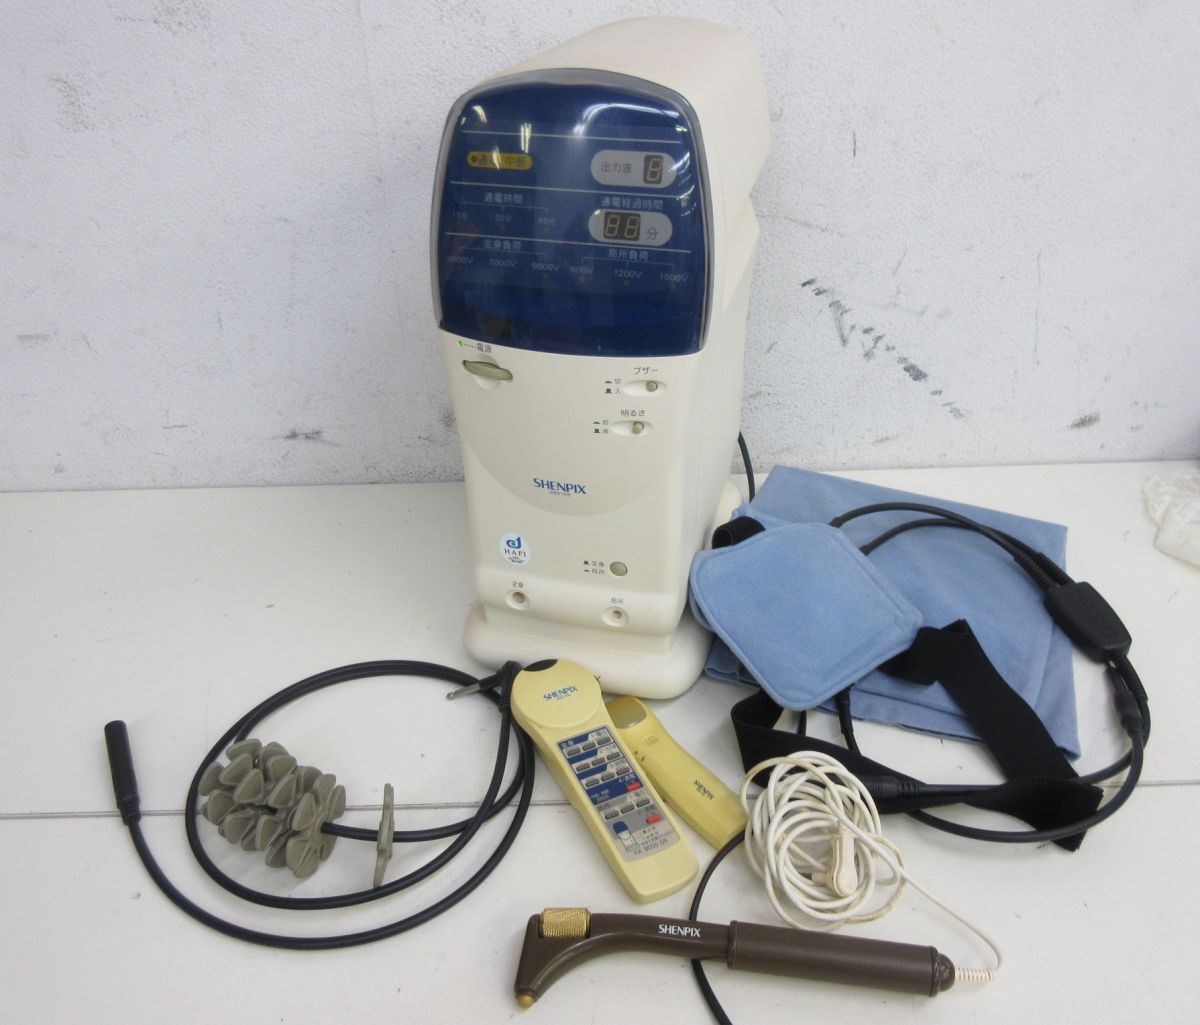 Z017-N38-426 Fuji medical care vessel shempeksFA9000DX home use static electricity therapy apparatus electrification verification settled present condition goods ①